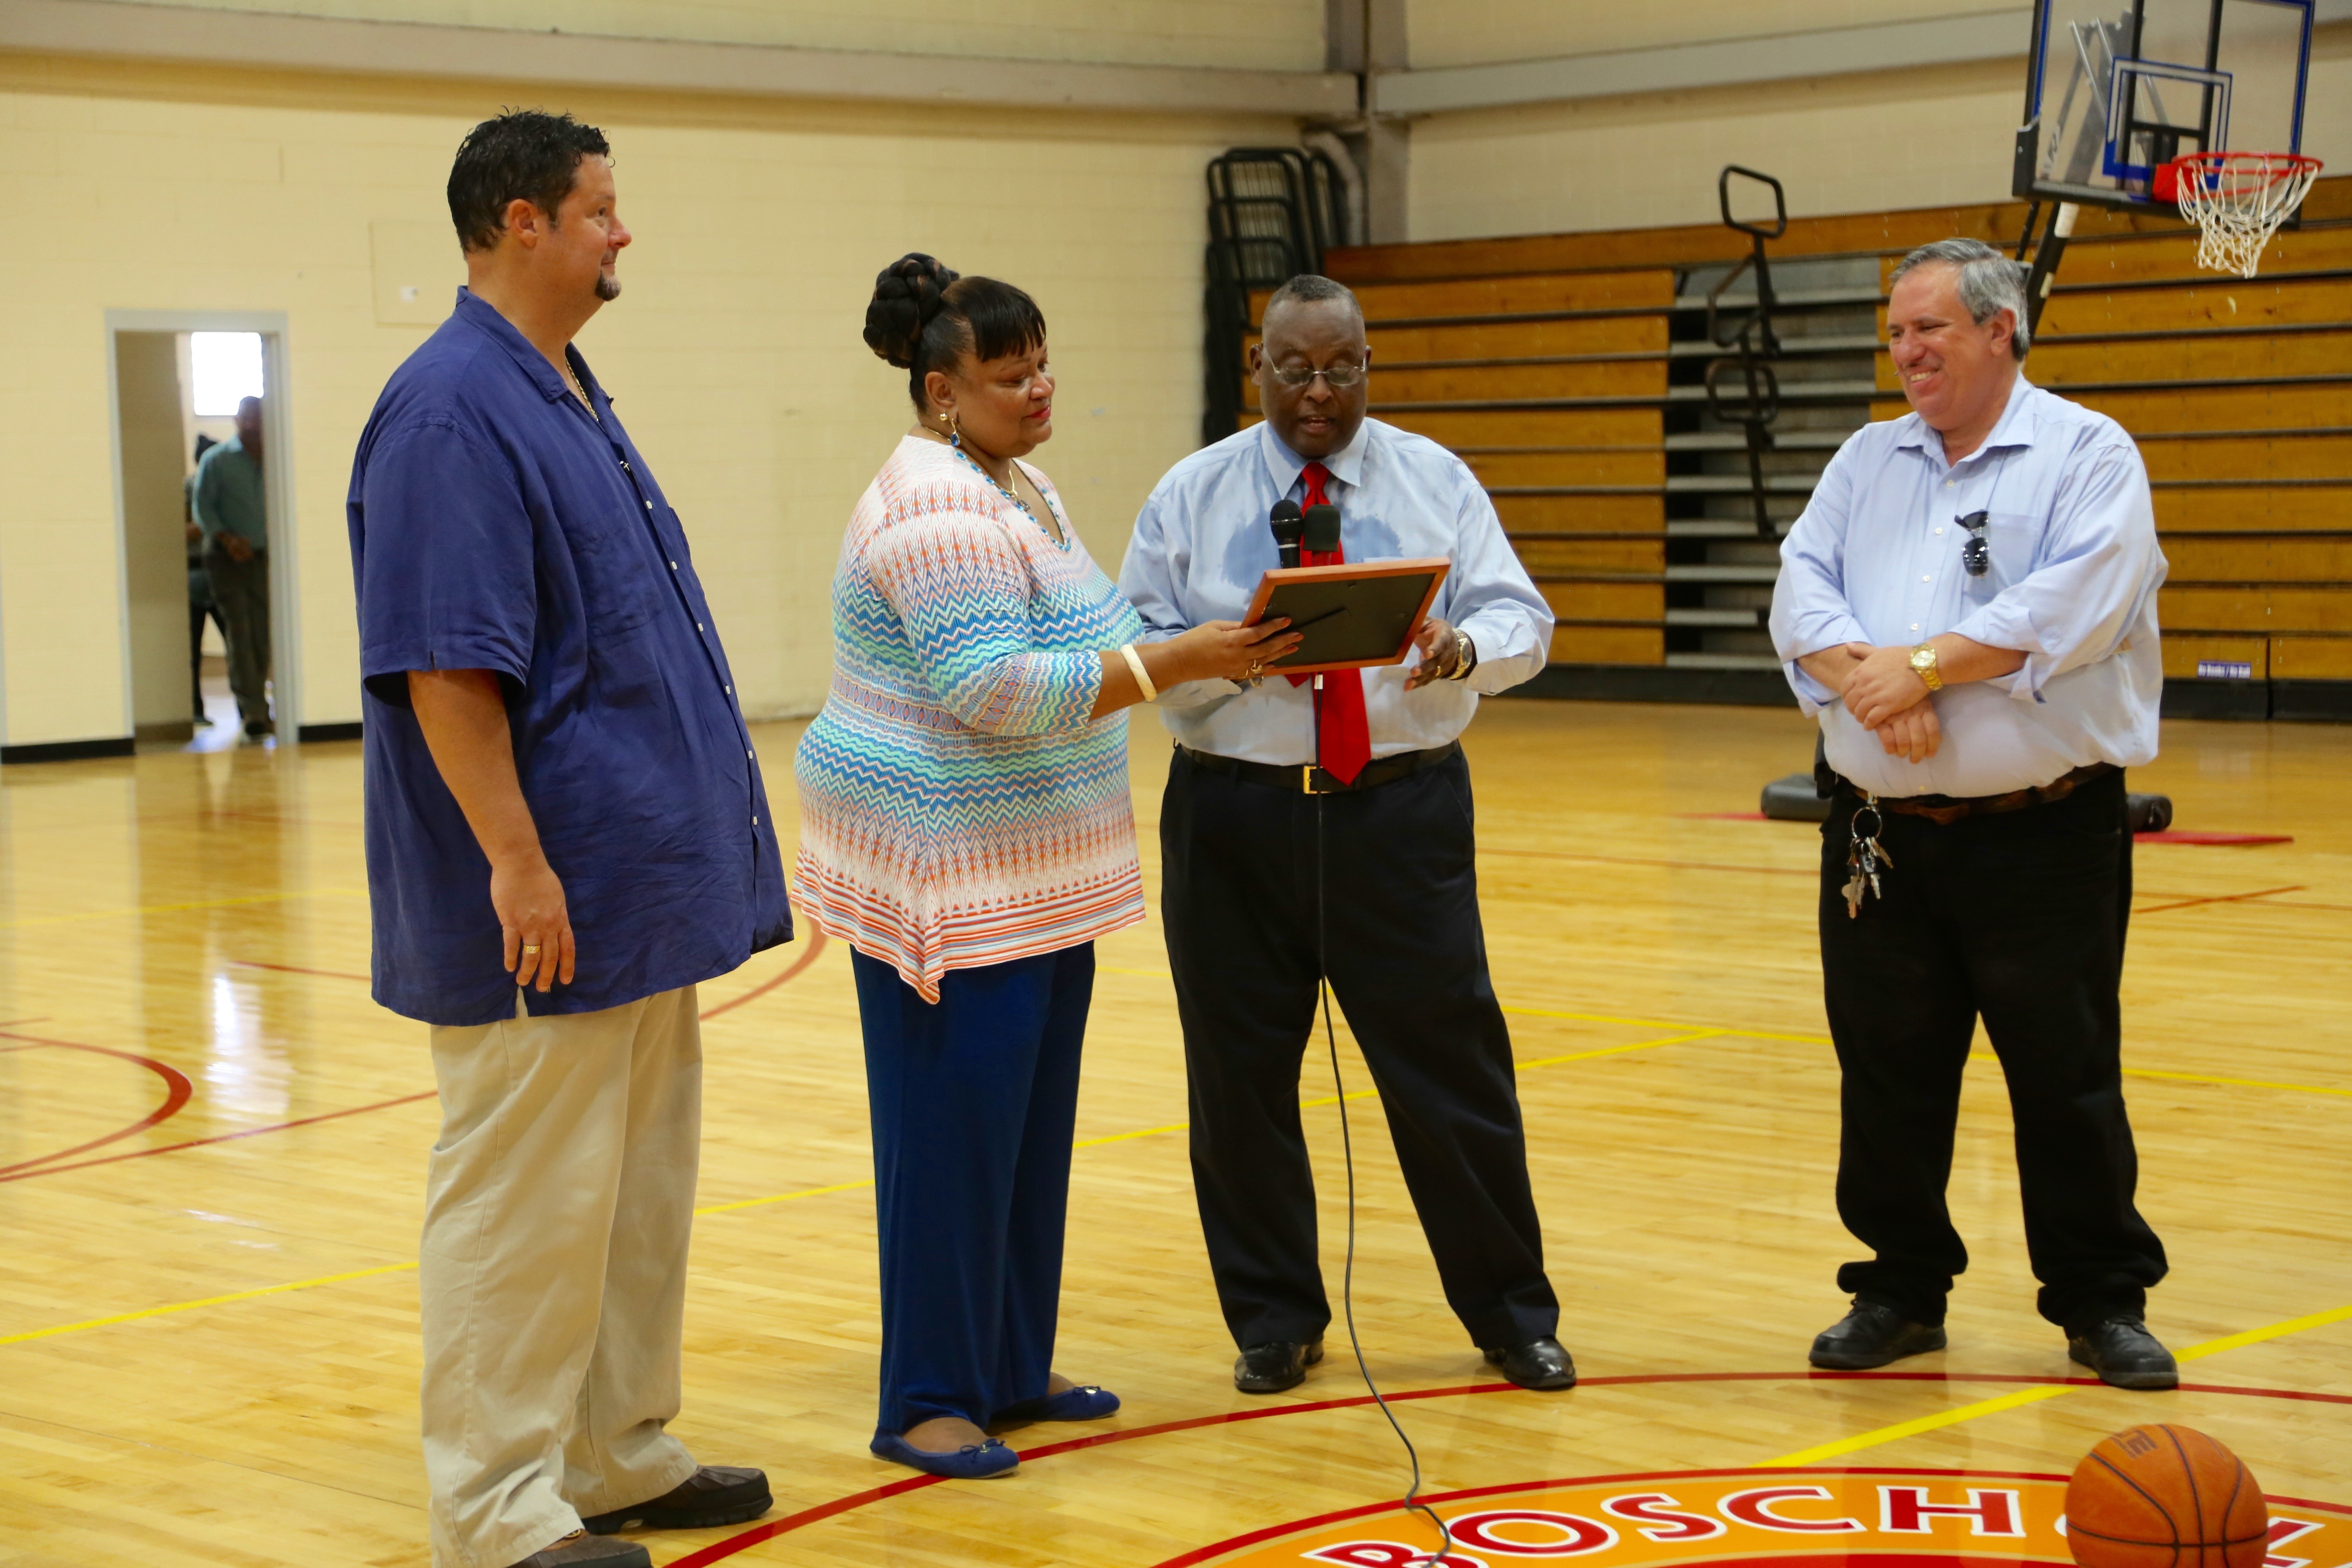 BCB Middle School Principal Carver Farrow presents Education Commissioner Sharon Ann McCollum with a certificate of appreciation at the unveiling of the school&rsquo;s new hardwood basketball floors on Aug. 31. Peter Seipel, left, territorial director of athletics. and James Bernier, right, territorial director of capital projects and facilities, look on.